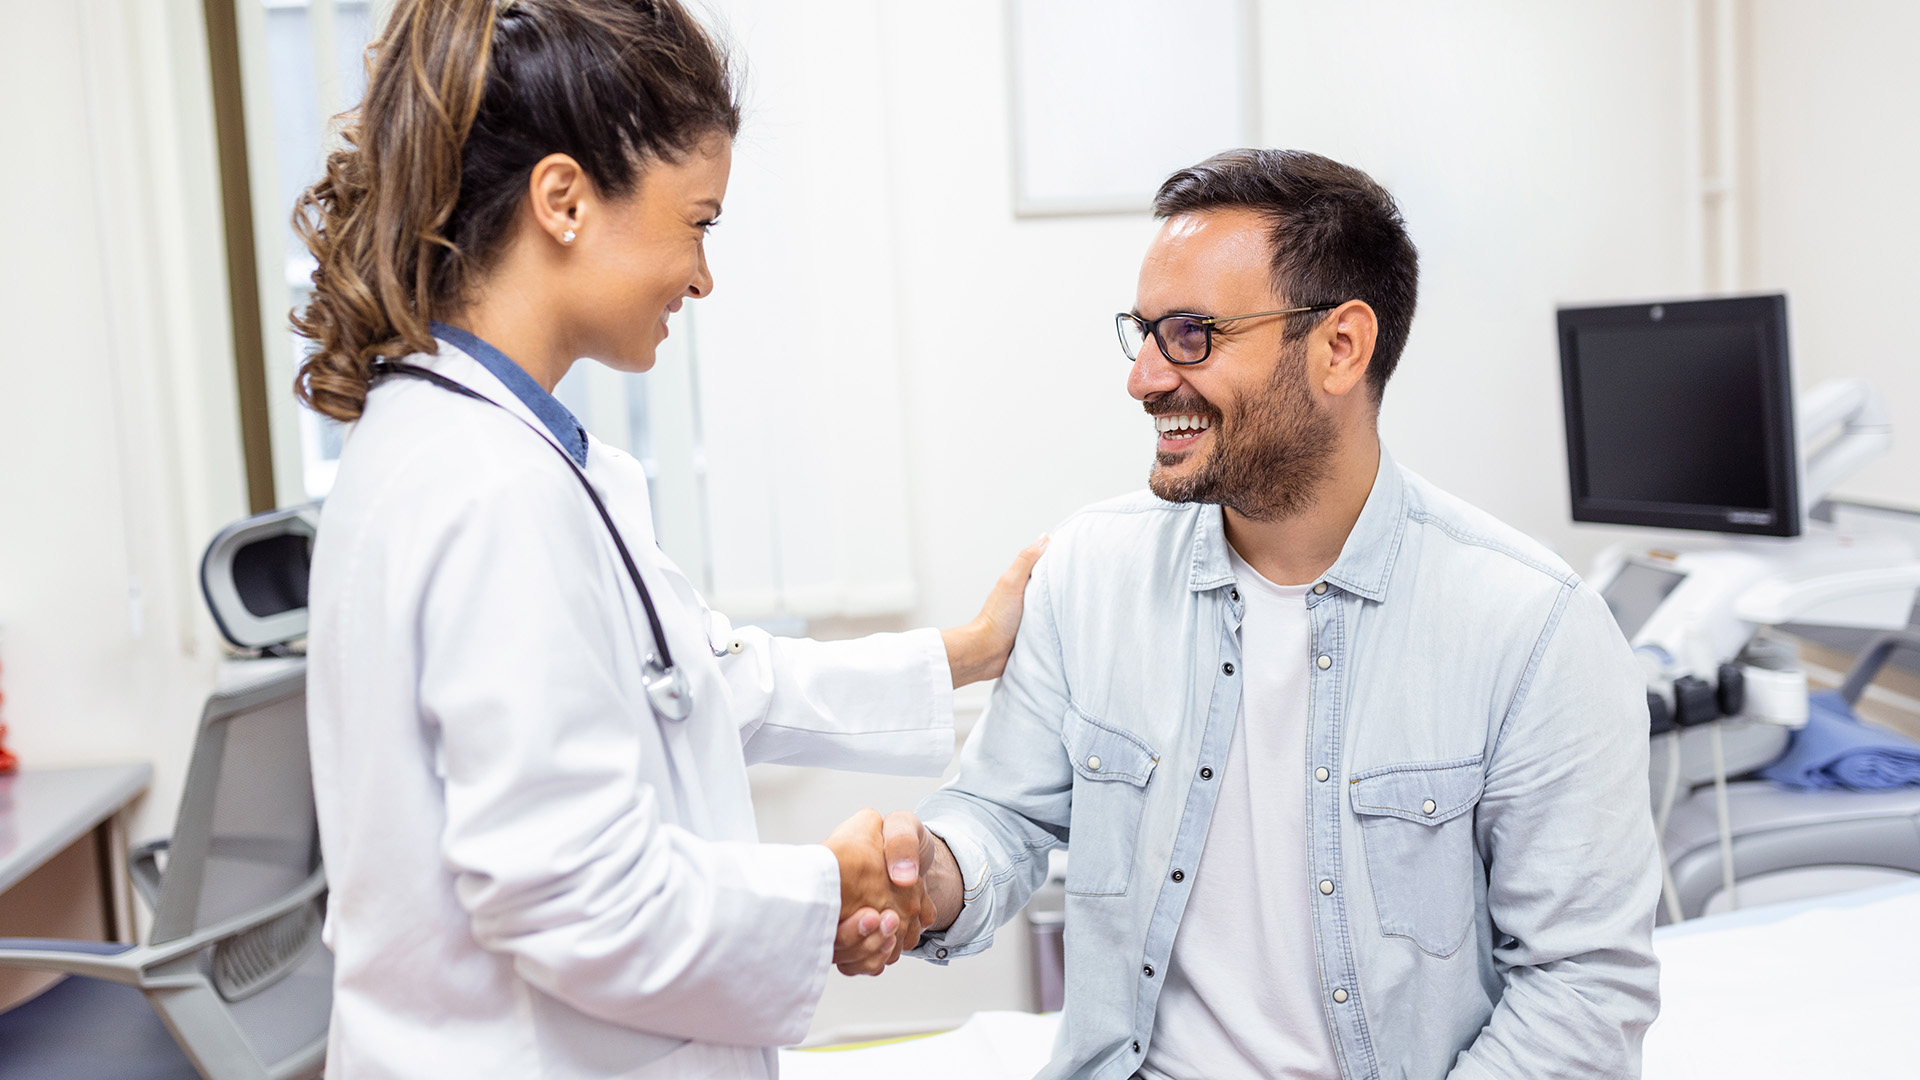 Patient shaking doctor's hand while doctor reassures him.